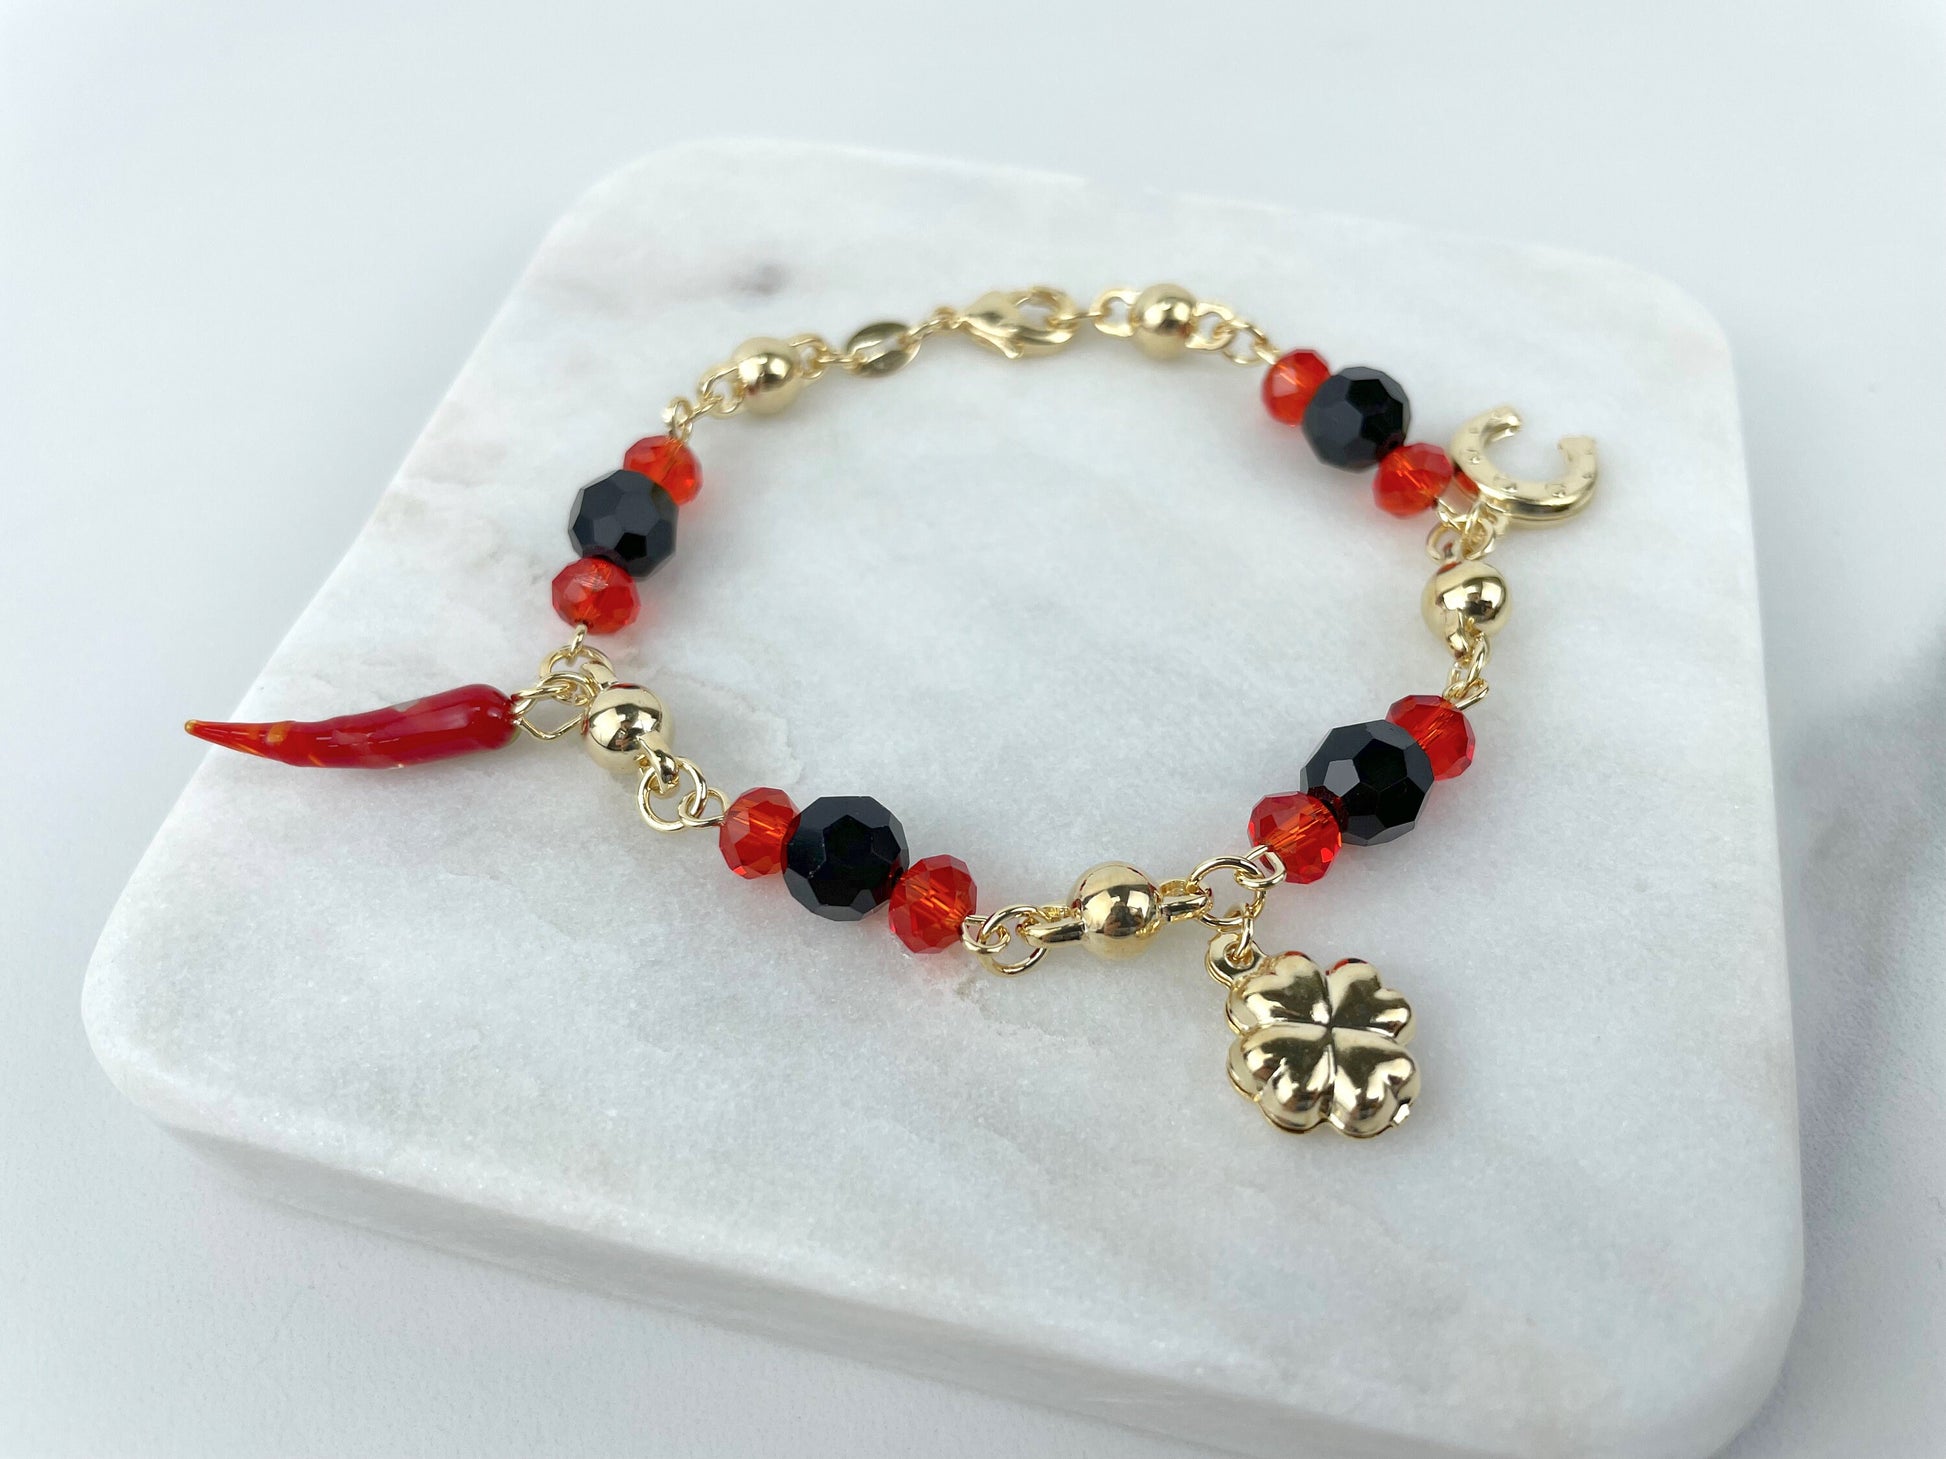 18k Gold Filled Black, Red and Gold Beads, Simulated Azabache, Clover, Horseshoe, Chili Charms Bracelet Wholesale Jewelry Making Supplies